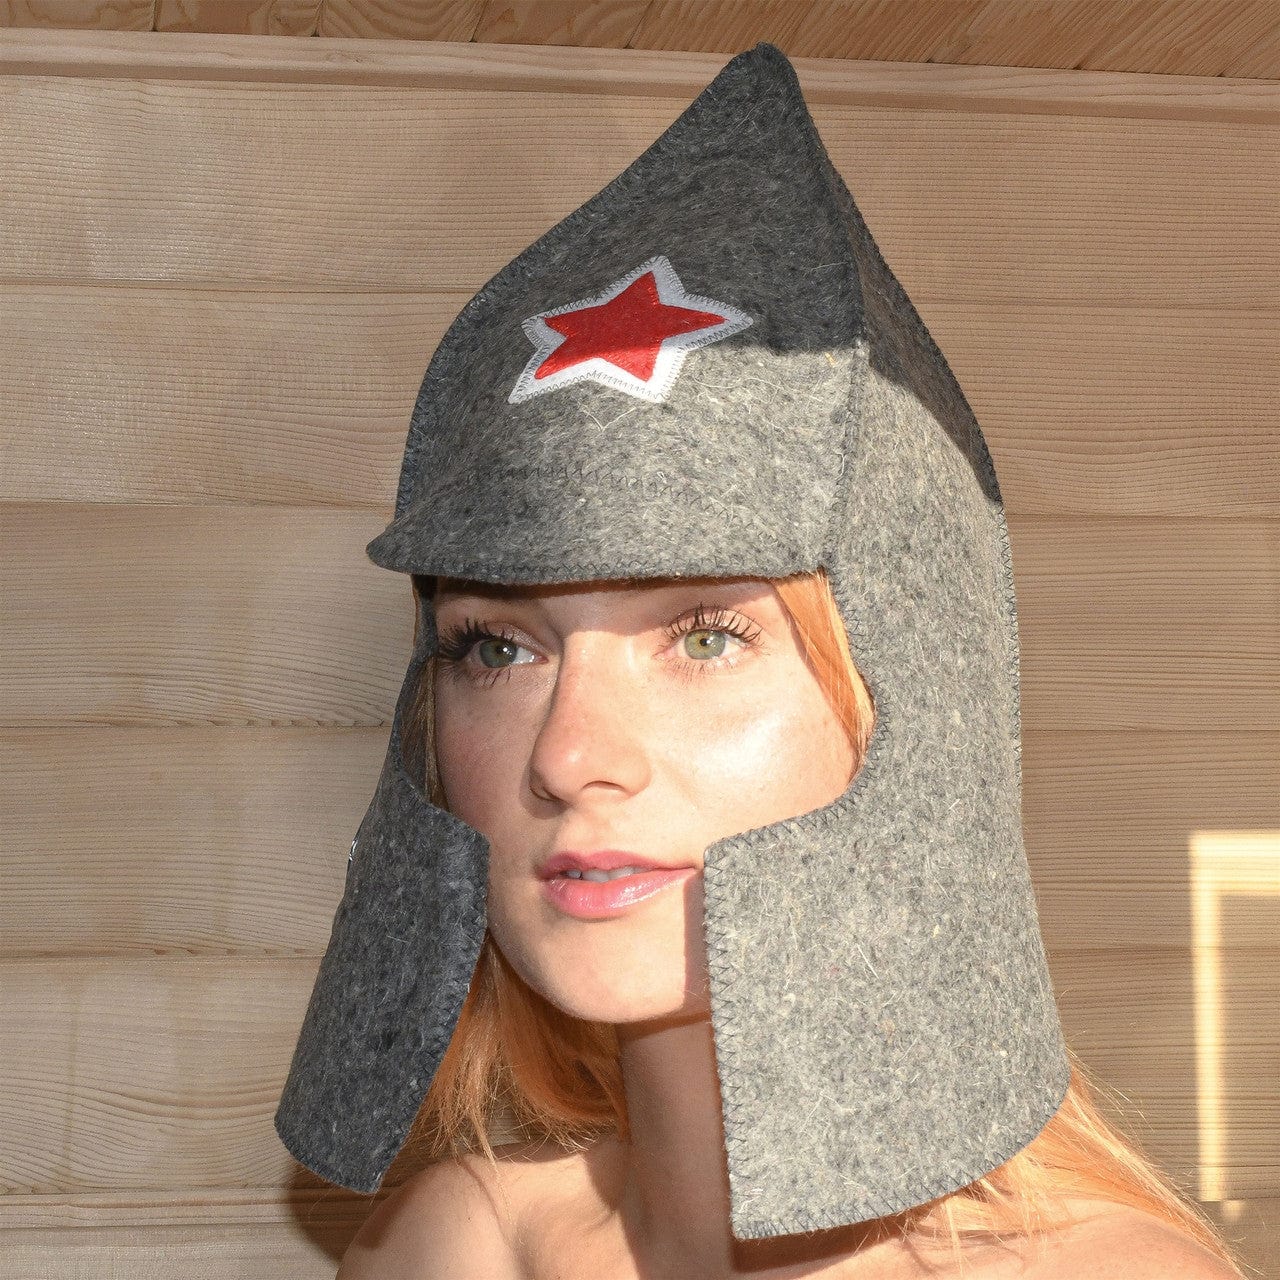 Aleko SH02-AP Natural Sheep Wool Traditional Sauna Hat - Unisex - Charcoal with Embroidered Star